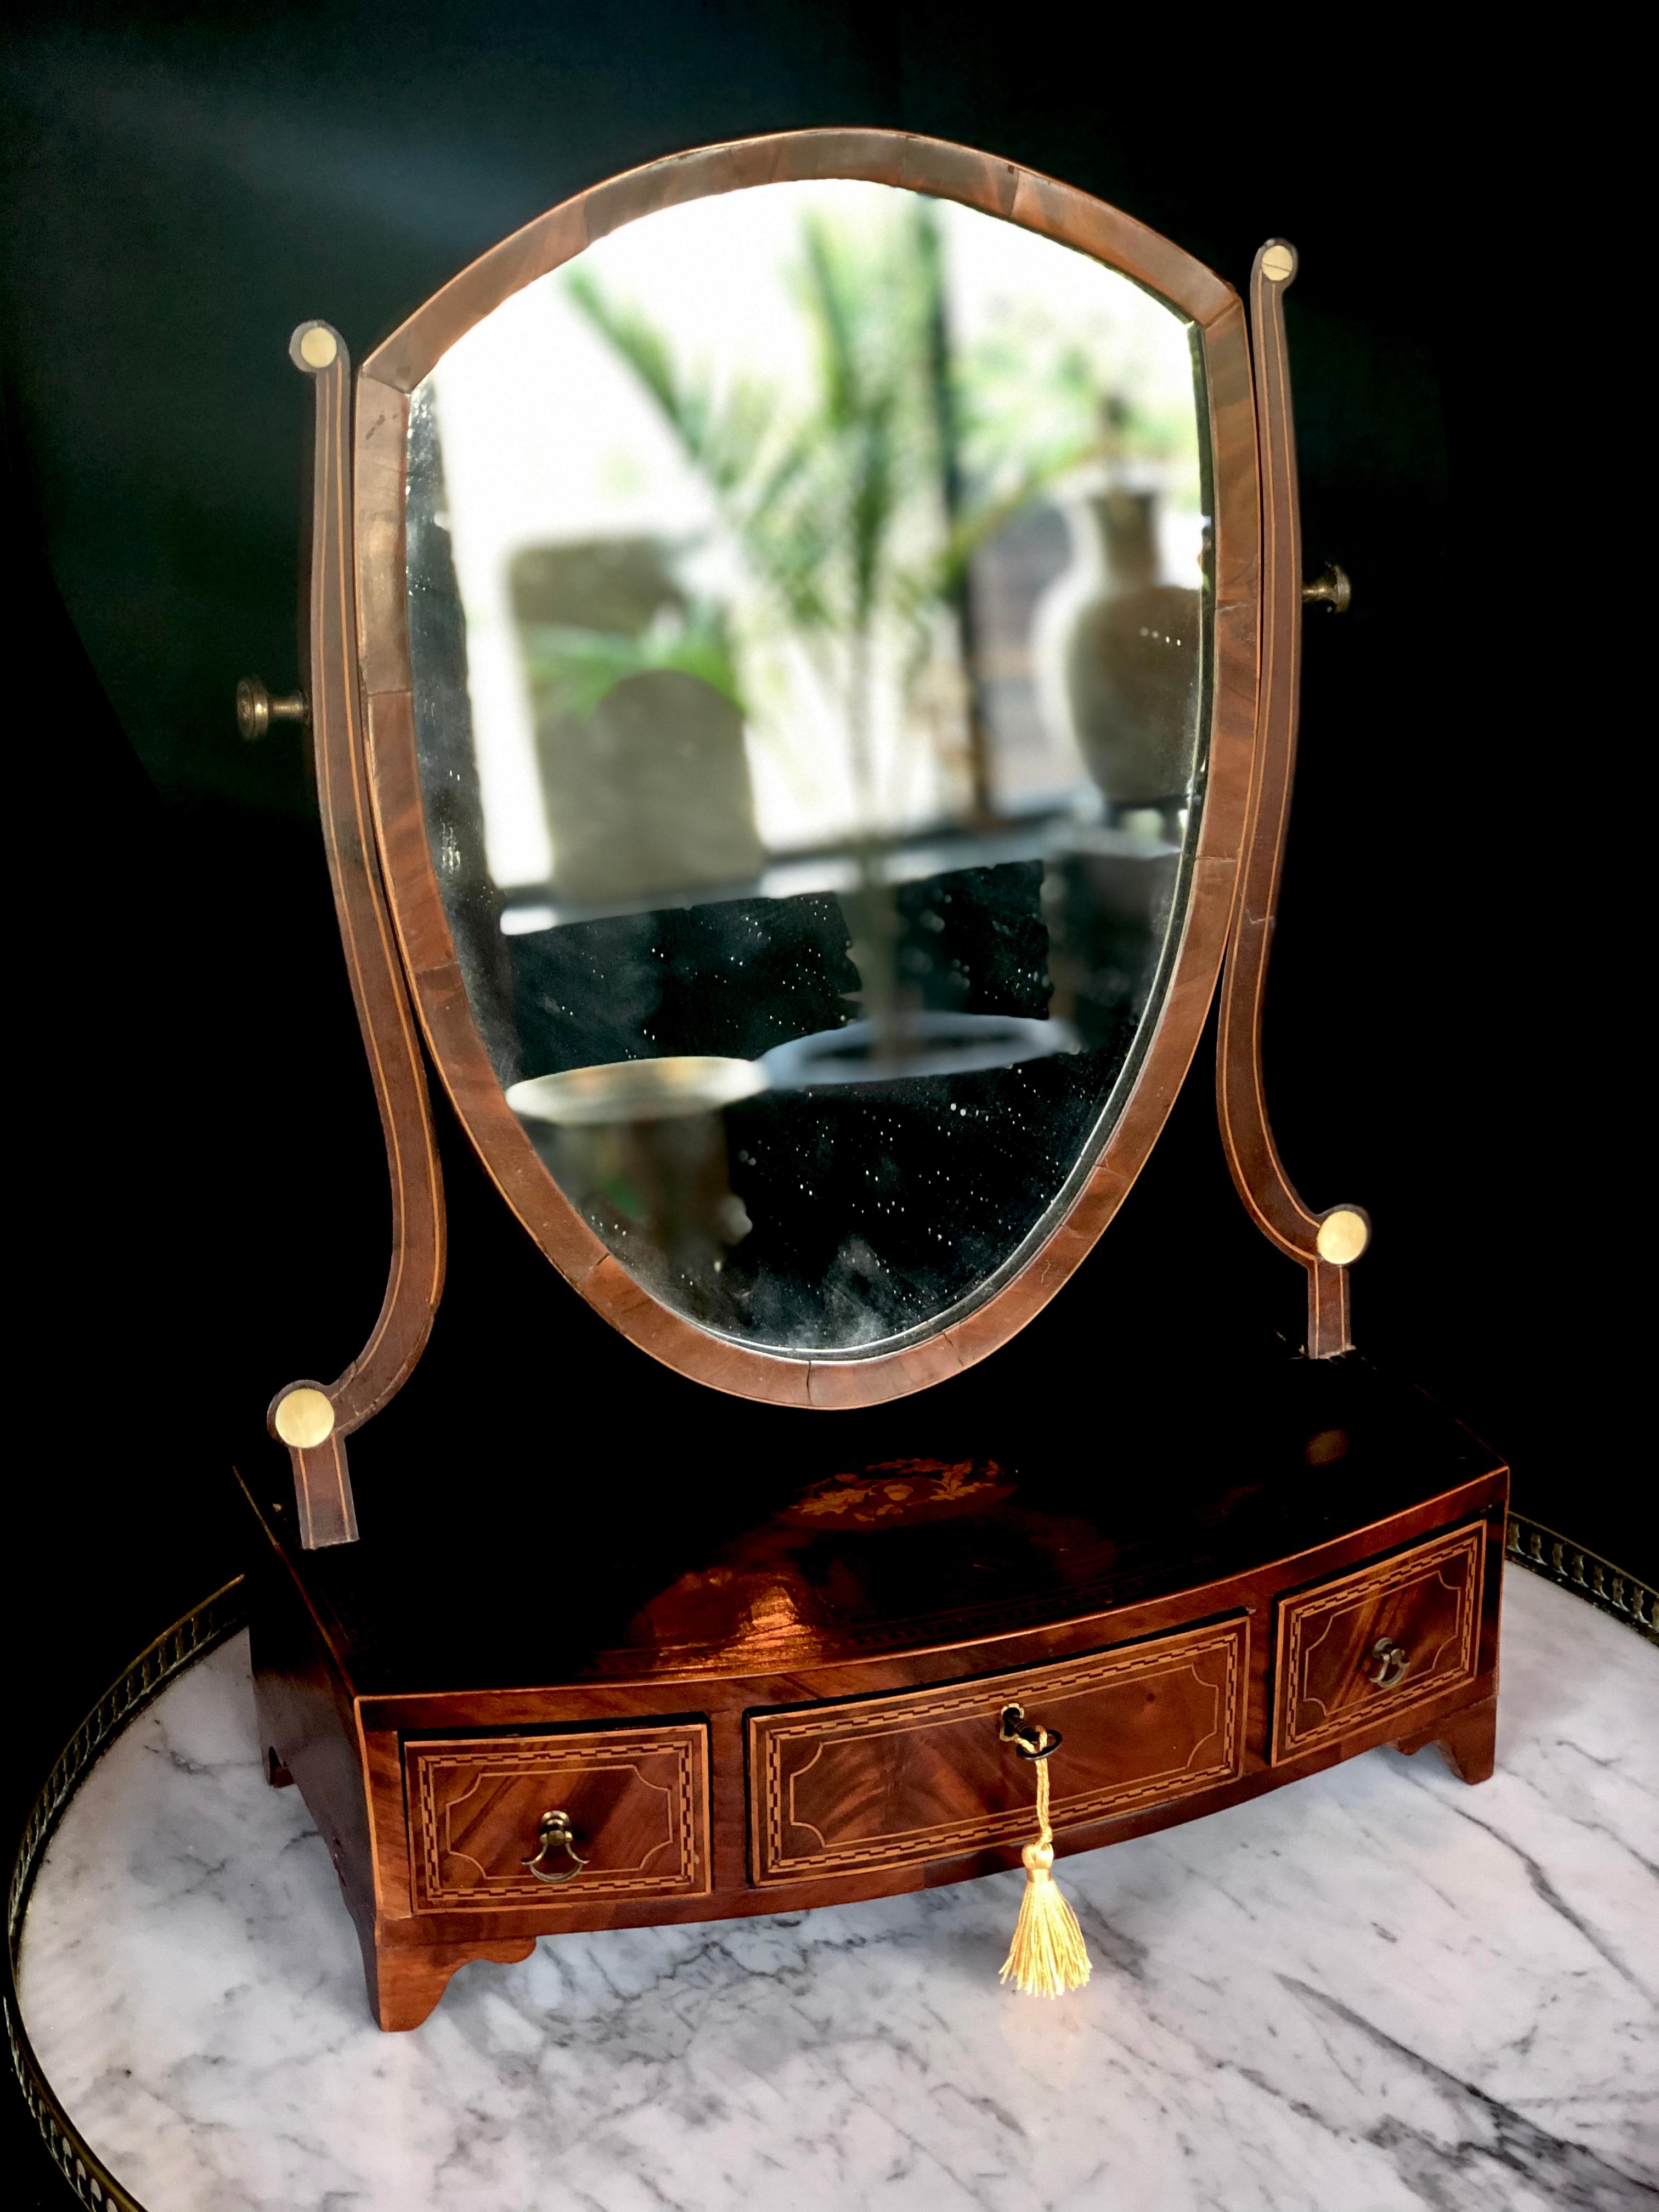 Gorgeous mahogany frame. The surface has been inlayed with oak leaves and acorns in a center medallion. The perimeter is outlined with banded inlays. Three fitted drawers are also outlined with string inlay patterns. One working key.